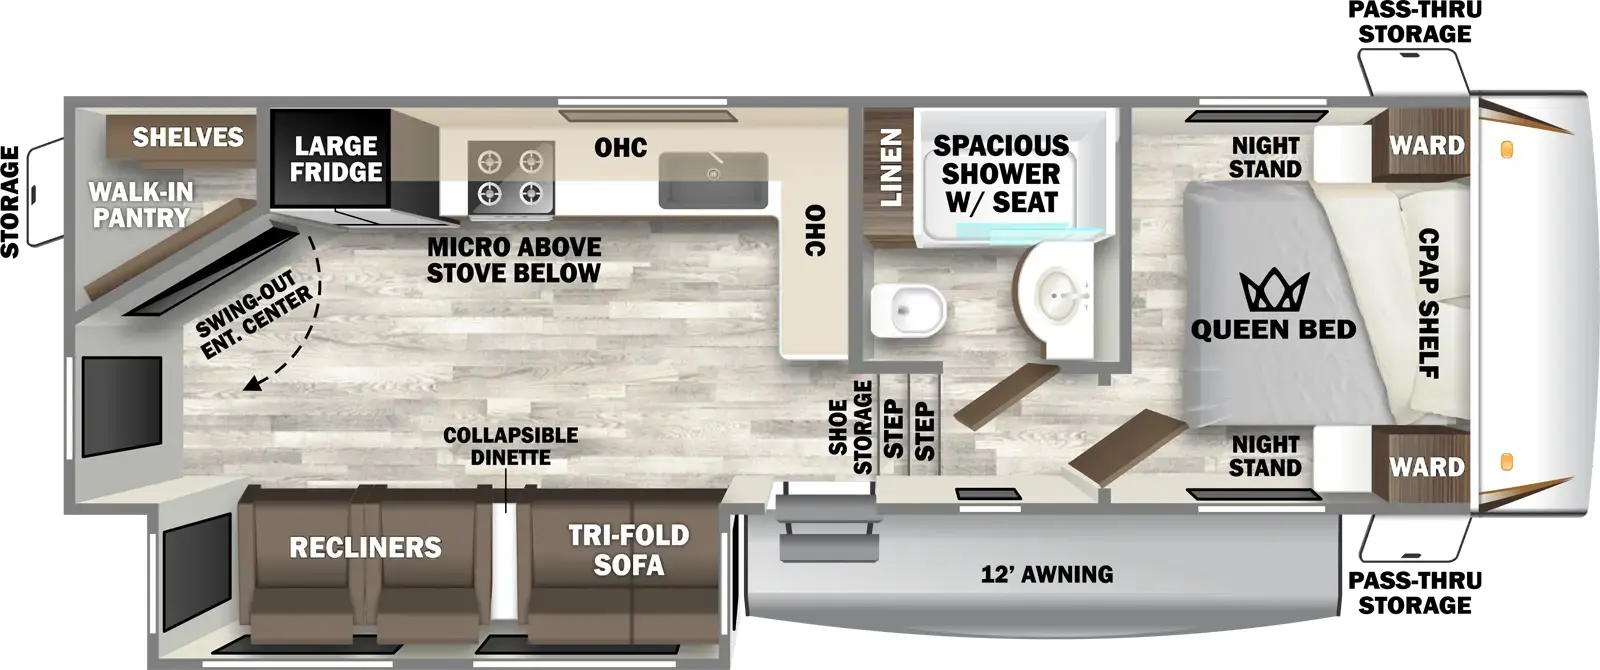 The 25RLS has one slideout and one entry. Exterior features front pass-through storage, 12 foot awning, and rear storage. Interior layout front to back: foot-facing queen bed with c-pap shelf, and wardrobes with nightstands on each side; off-door side full bathroom with linen closet and shower with seat; steps down to main living area and entry with shoe storage; kitchen counter with overhead cabinet wraps from inner wall to off-door side with sink, microwave, cooktop stove, refrigerator, and rear swing-out entertainment center with hidden walk-in pantry with shelves behind; door side slideout with tri-fold sofa, collapsible dinette, and recliners.